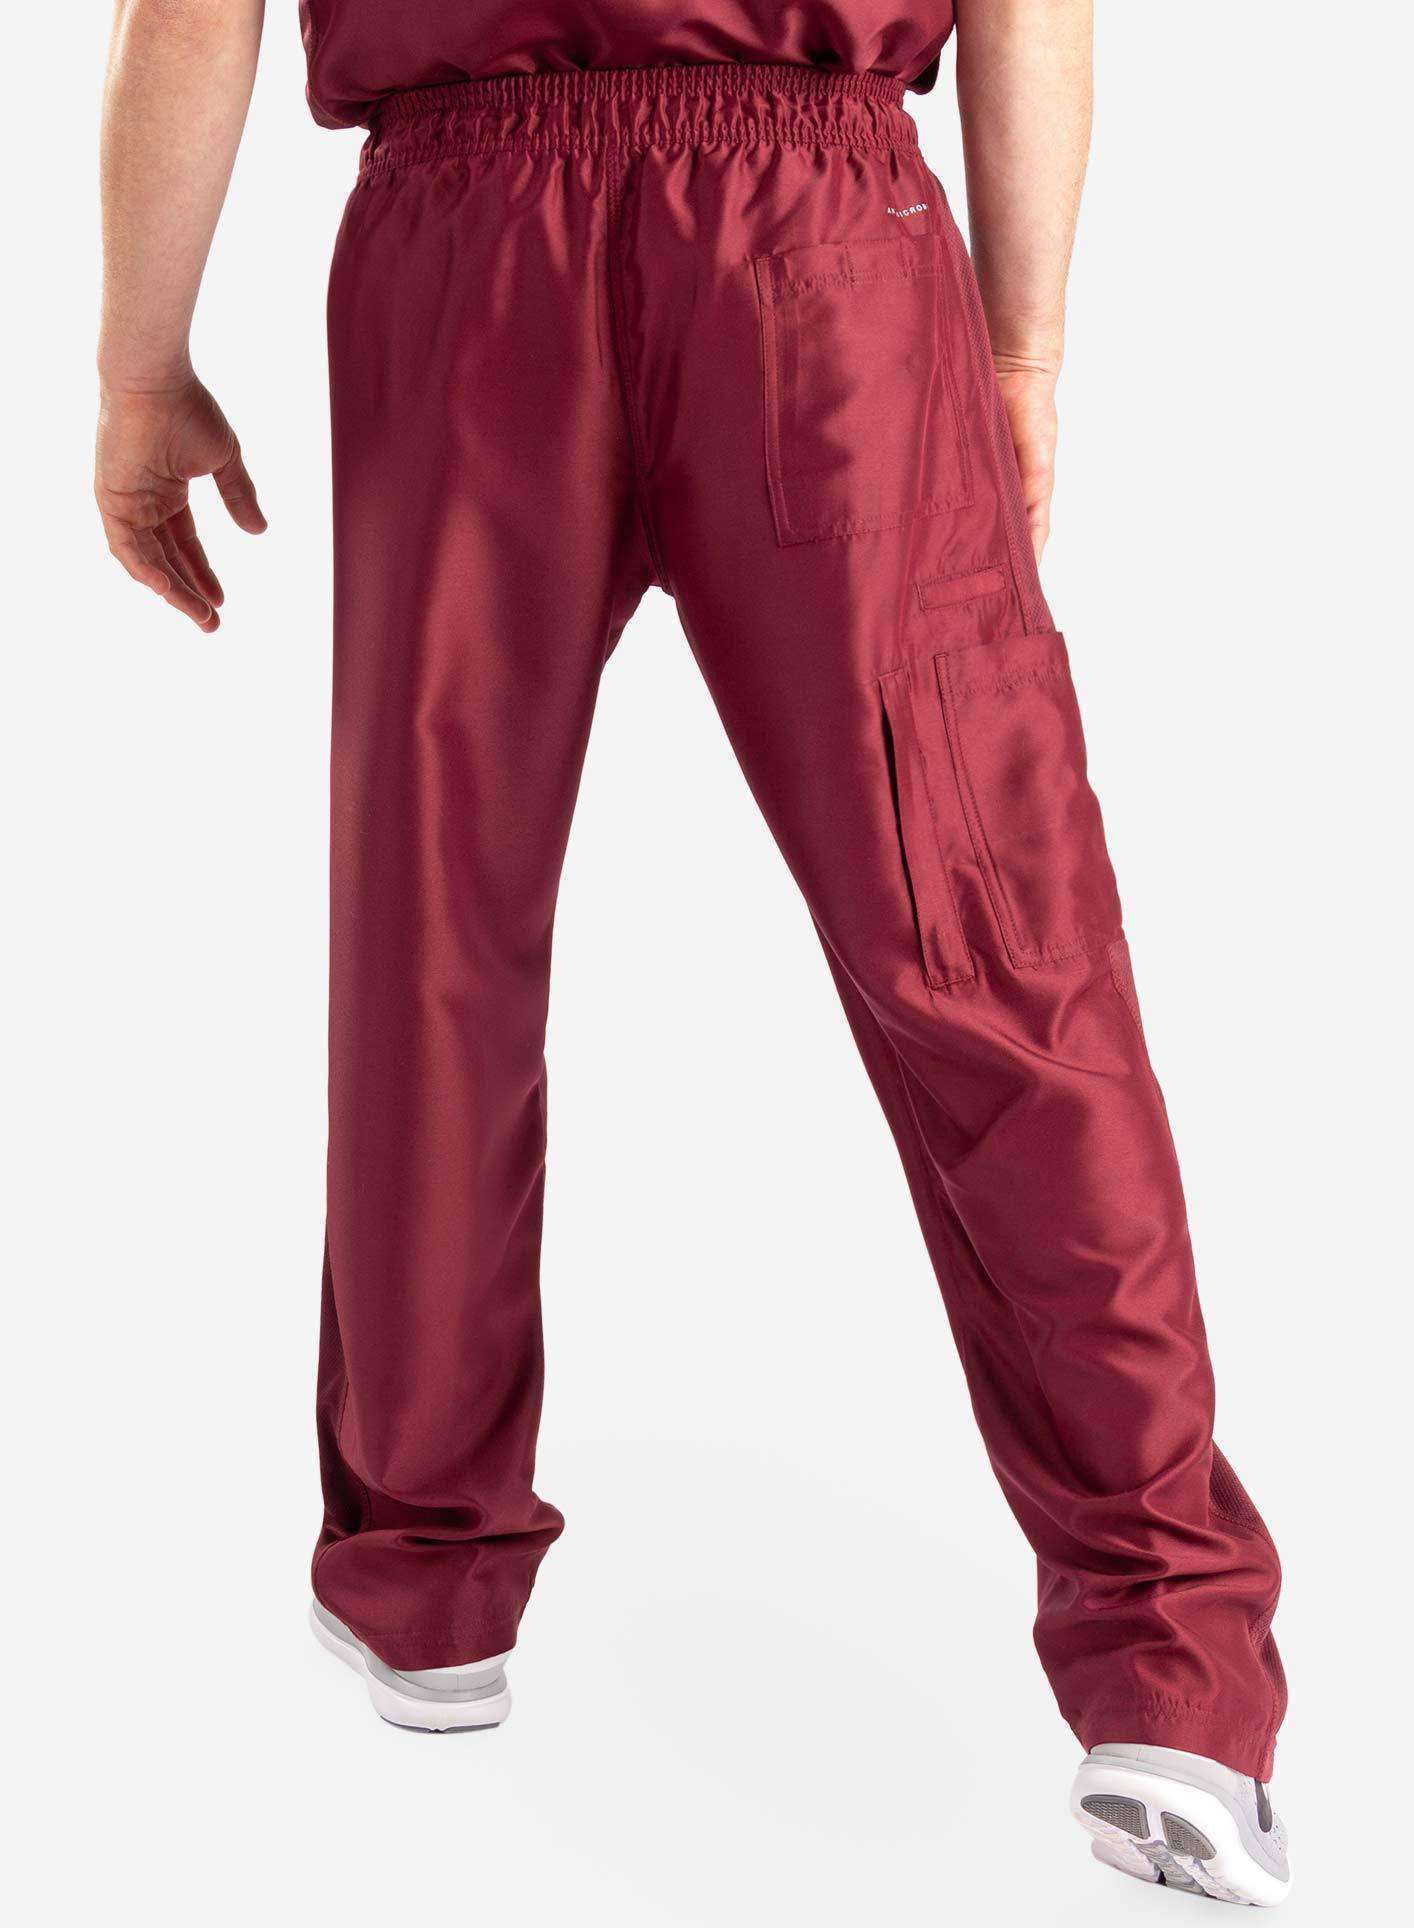 mens Elements cargo pocket relaxed fit scrub pants bold burgundy